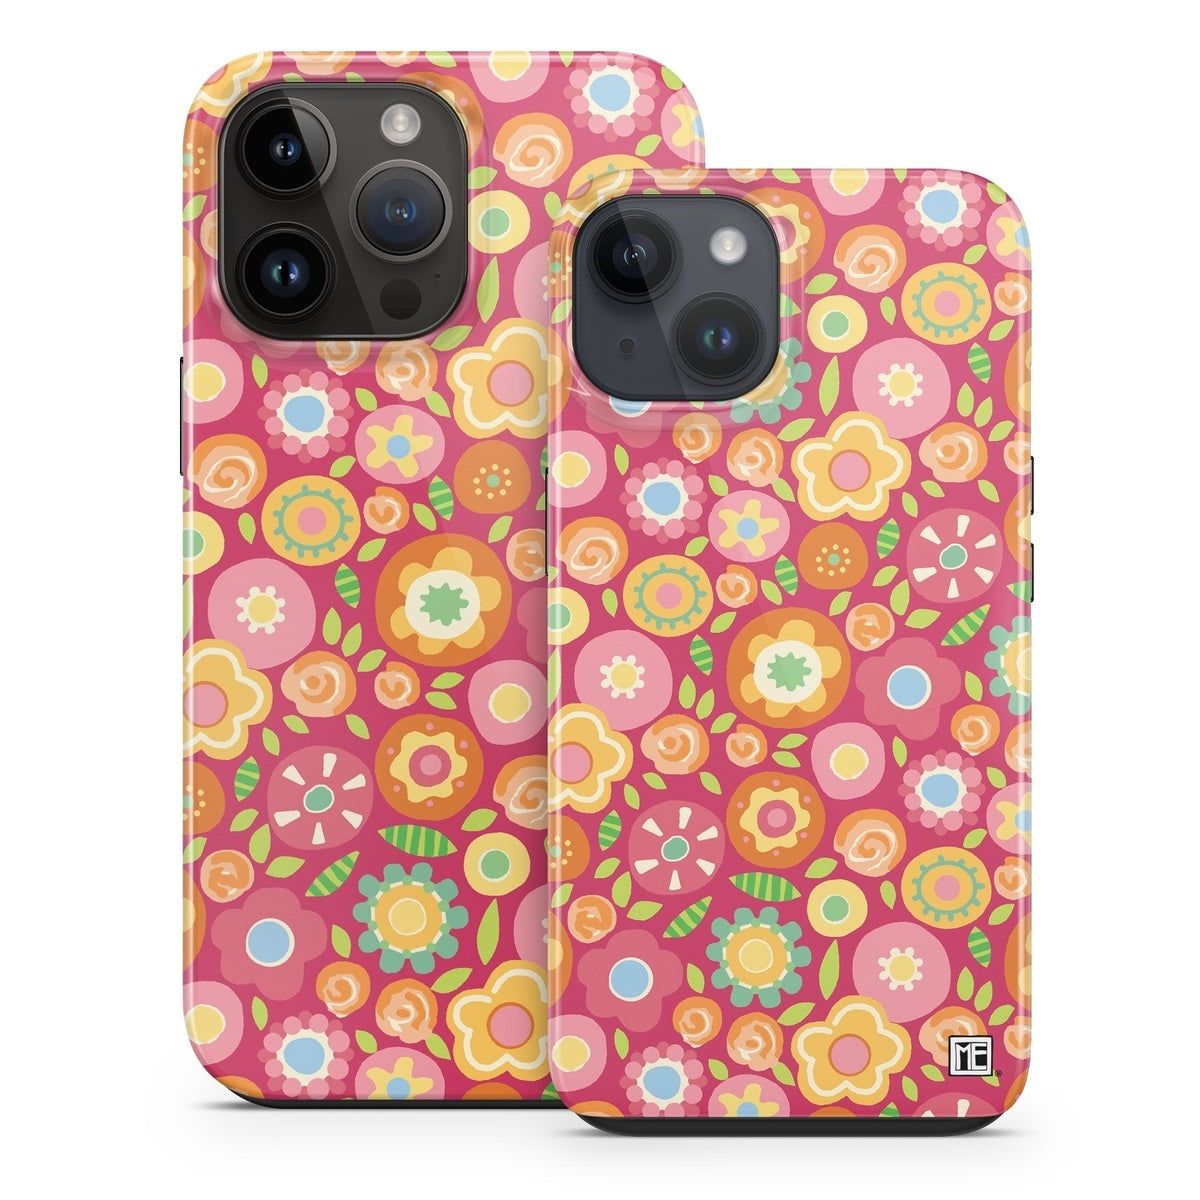 Squished Flowers Phone Cases